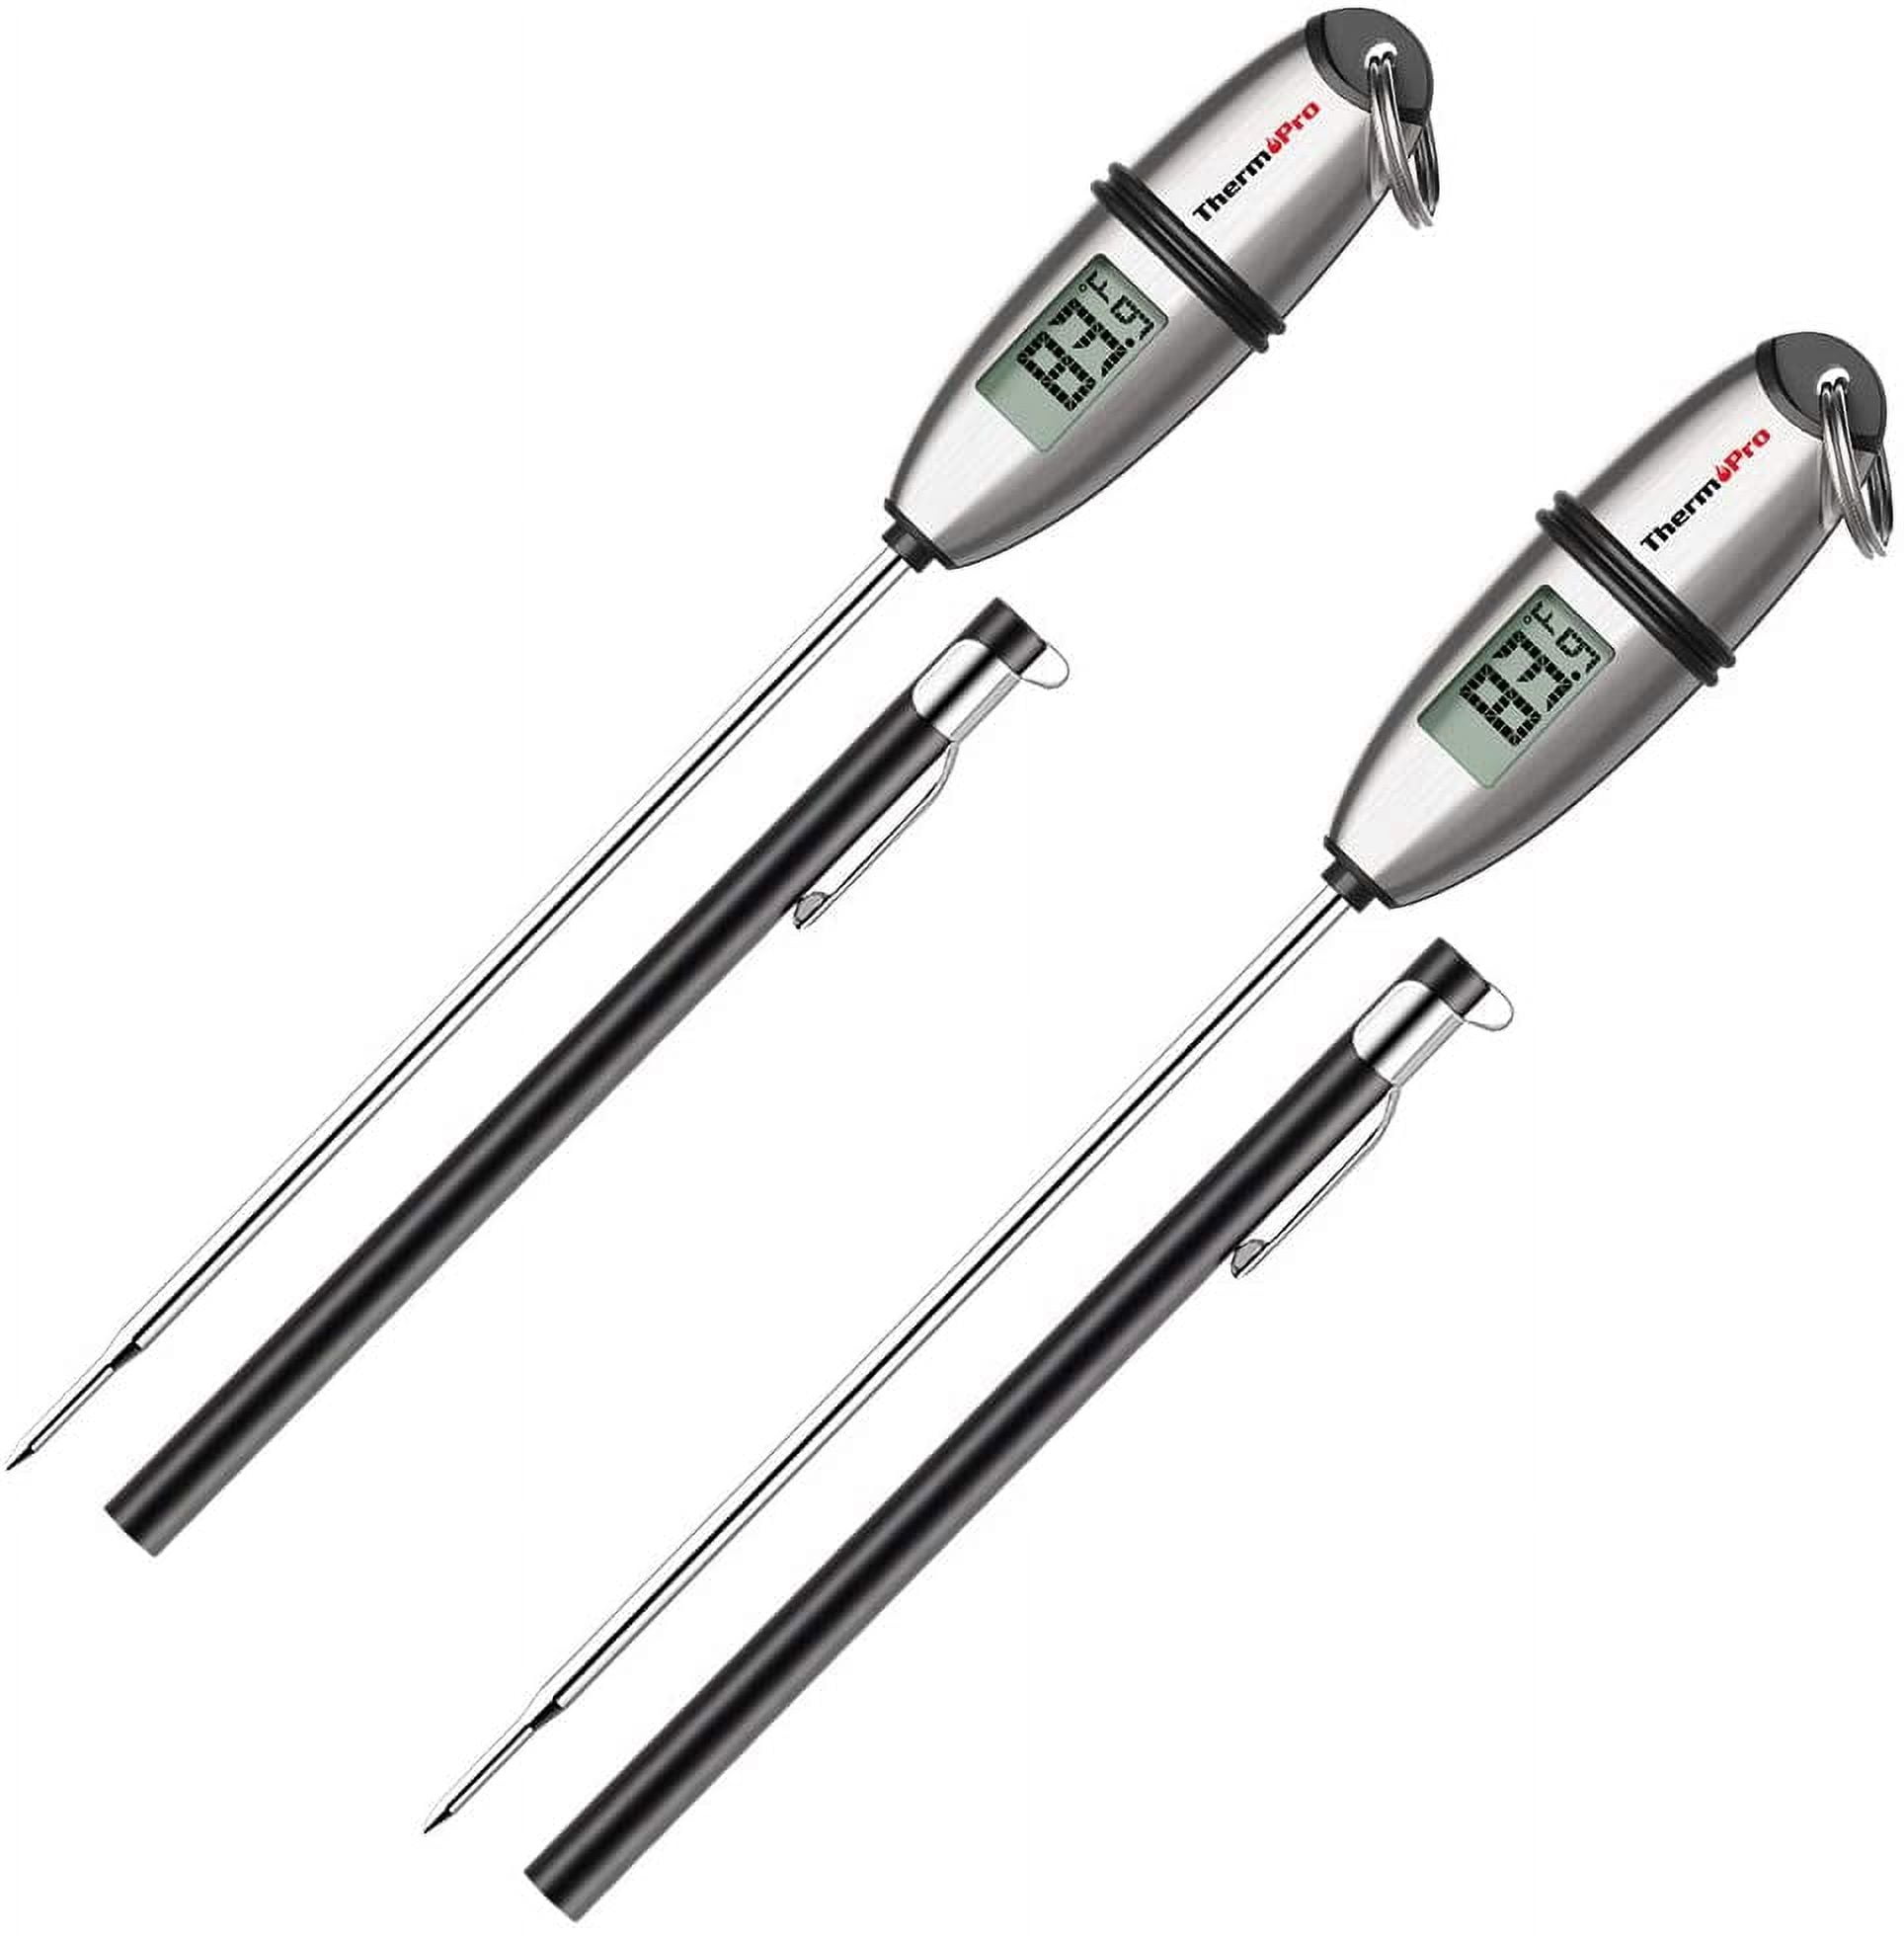 ThermoPro TP509 Candy Thermometer with Pot Clip, Instant Read Meat Analog Thermometer with LCD, Cooking Oil Thermometer Deep Frying Thermometer for